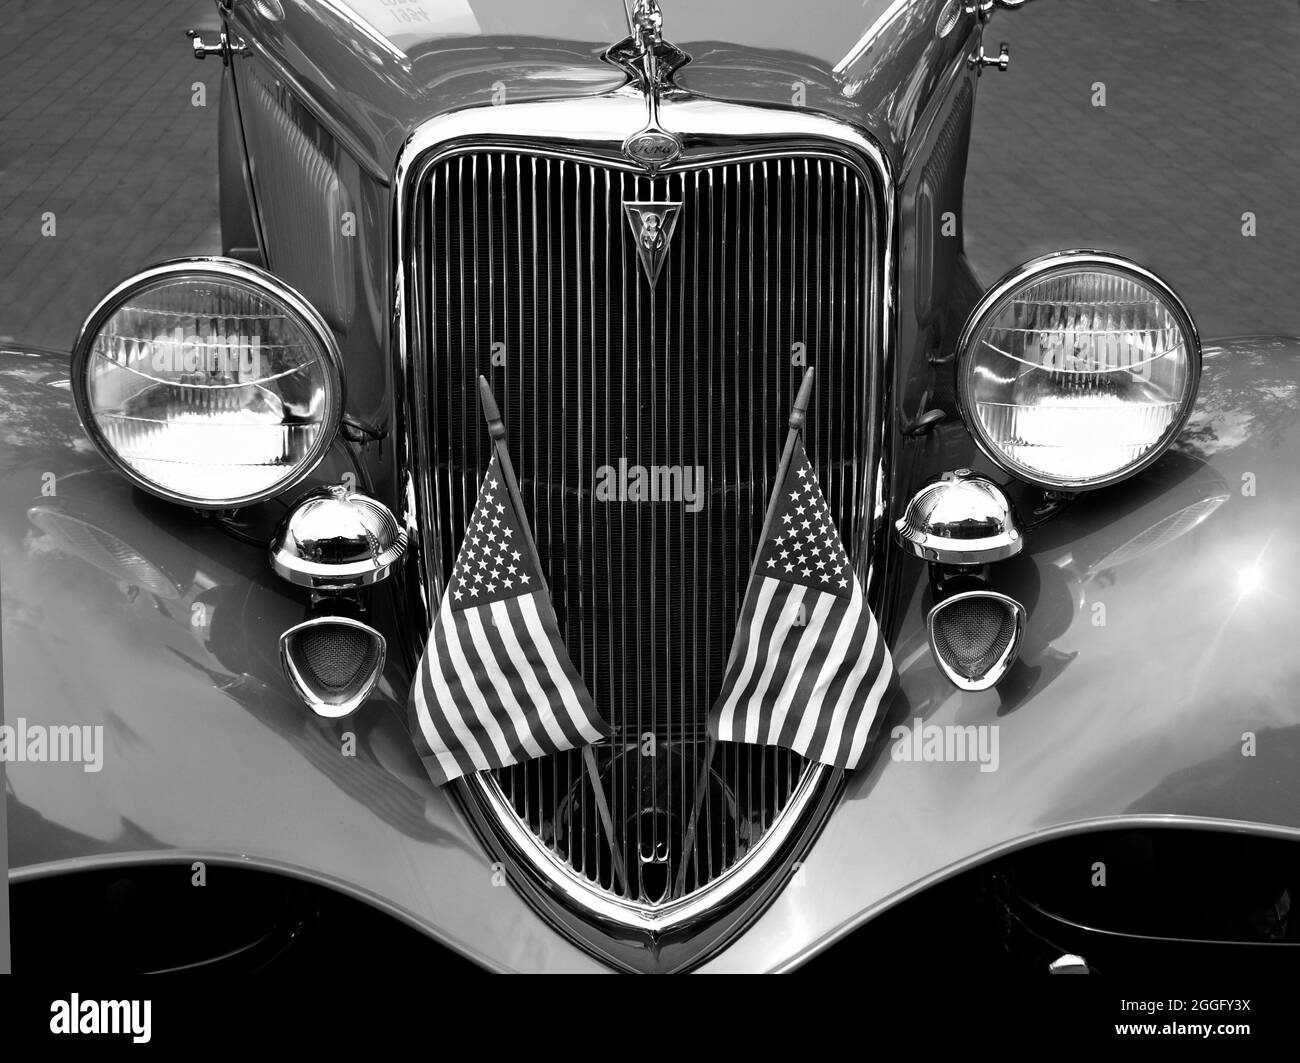 A 1934 Ford Phaeton V8 on display at a Fourth of July vintage car show in Santa Fe, New Mexico. Stock Photo